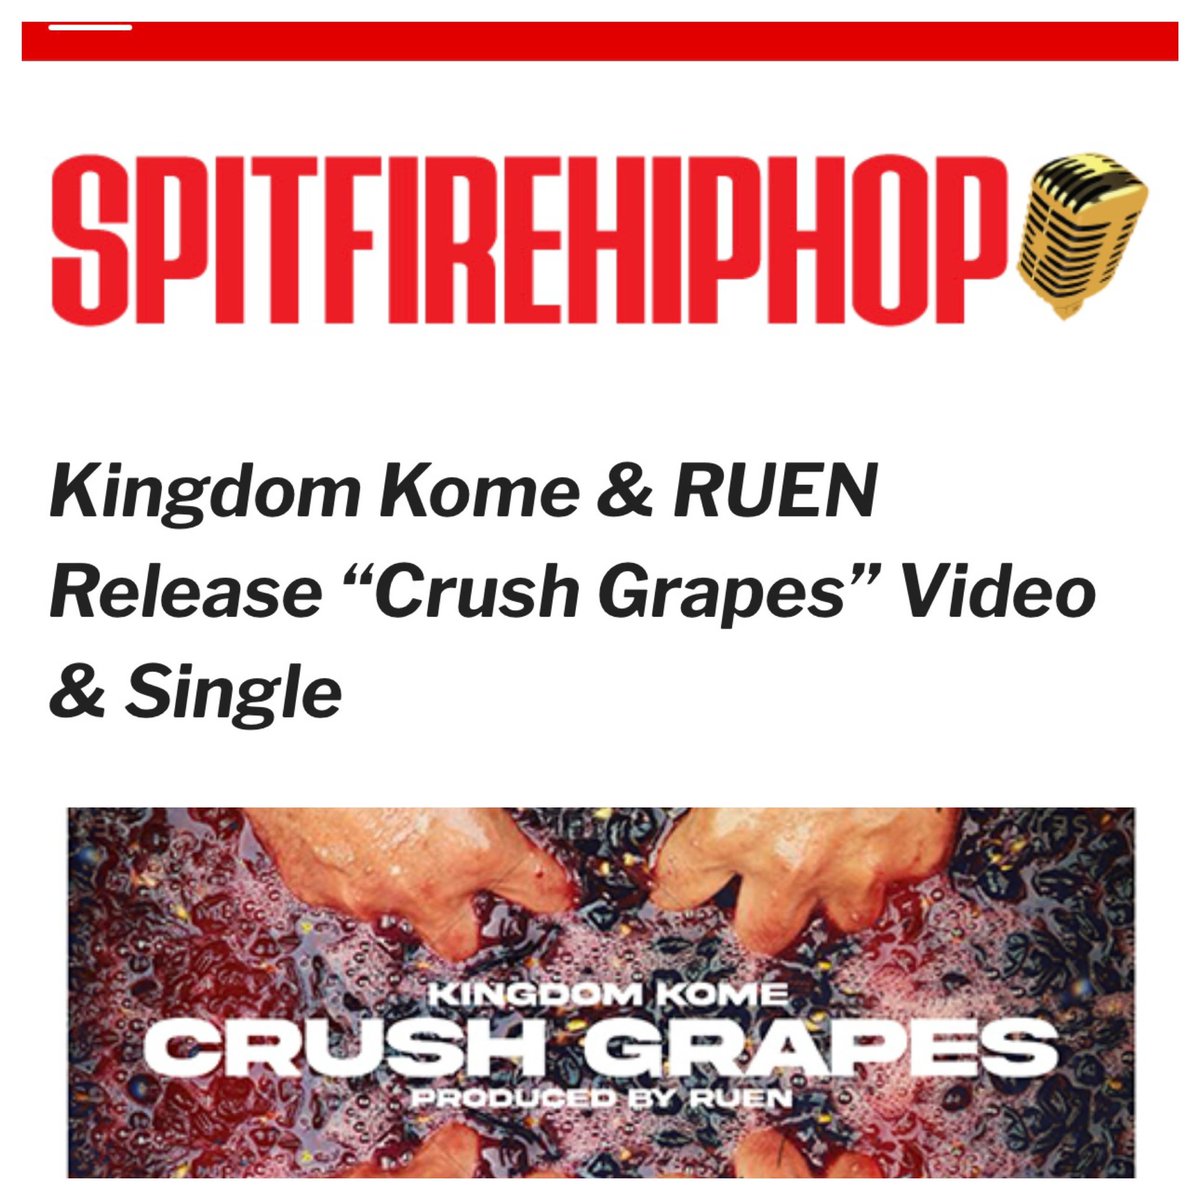 Big up 🥵🎤🔥 @spitfirehiphop 🔥👑🥵 
always holding me down 🫡👑

💥🍇 “CRUSH GRAPES” ✨OUT NOW 🍇💥
spitfirehiphop.com/features/2024/…

NEW VIDEO & SINGLE OUT ON ALL DSP’s 
#MALBEC2 🍷✌🏽DROPS 7/19 

#kingdomkome #crushgrapes #miamihiphop #spitfirehiphop #newvideo #undergroundhiphop